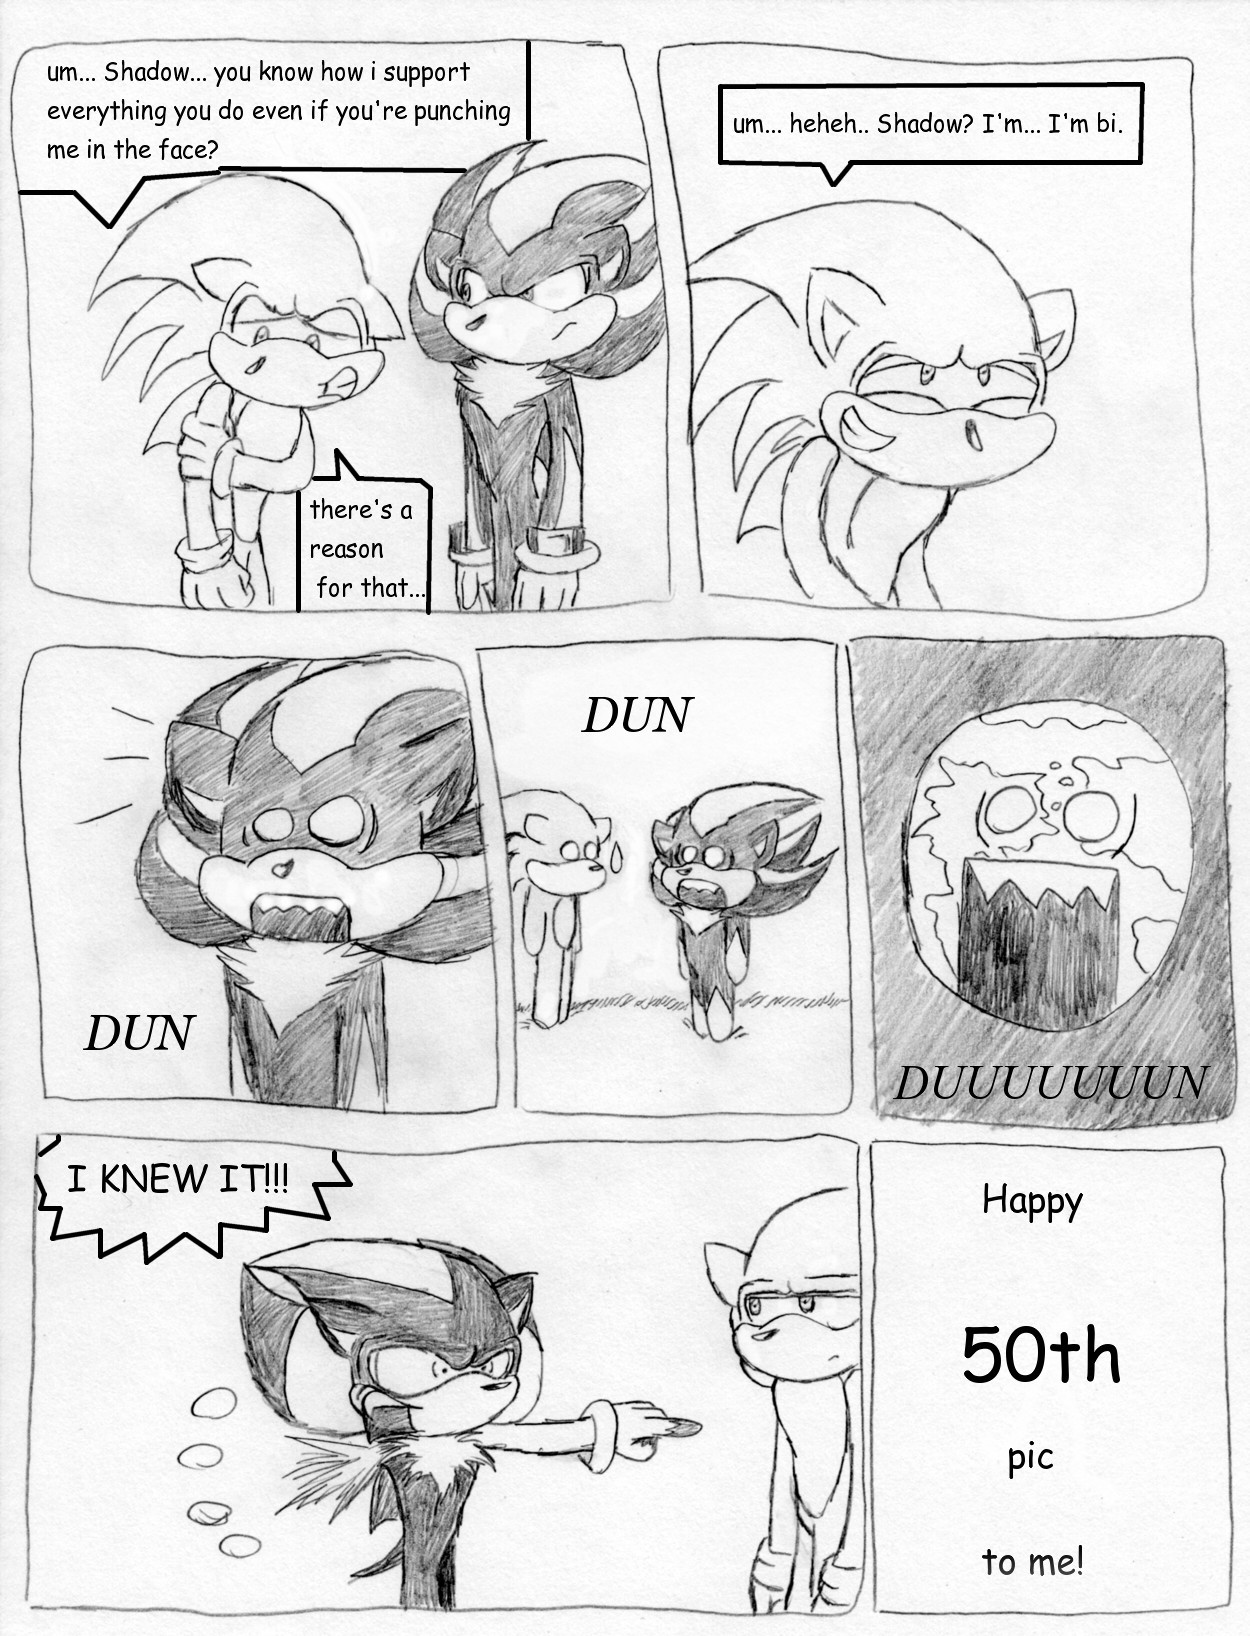 My 50th Pic - a random comic that has nothing to do with 50 by TheGameArtCritic